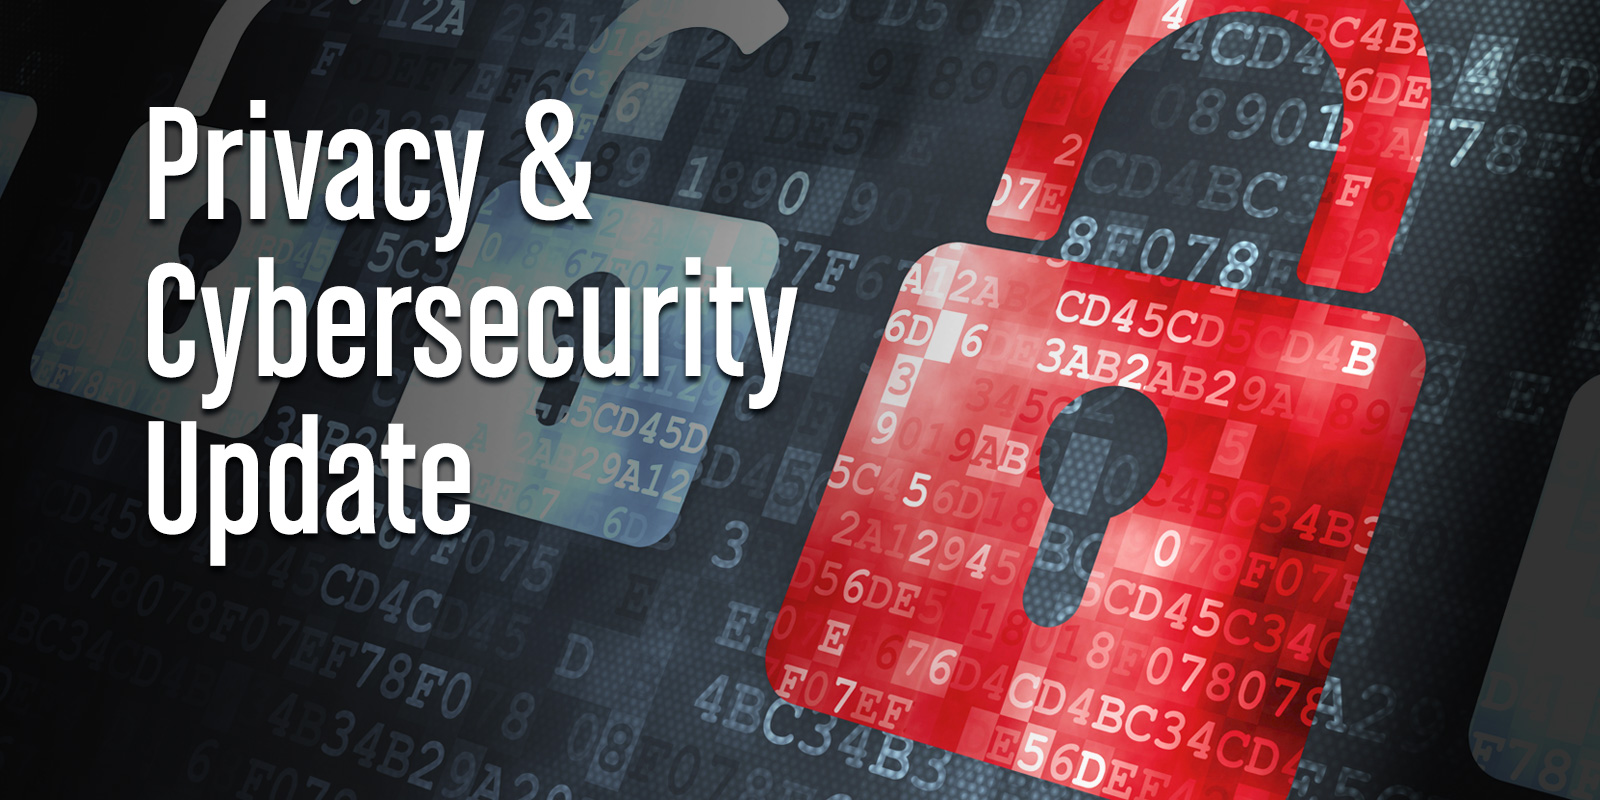 Global Privacy & Cybersecurity Update Vol. 15